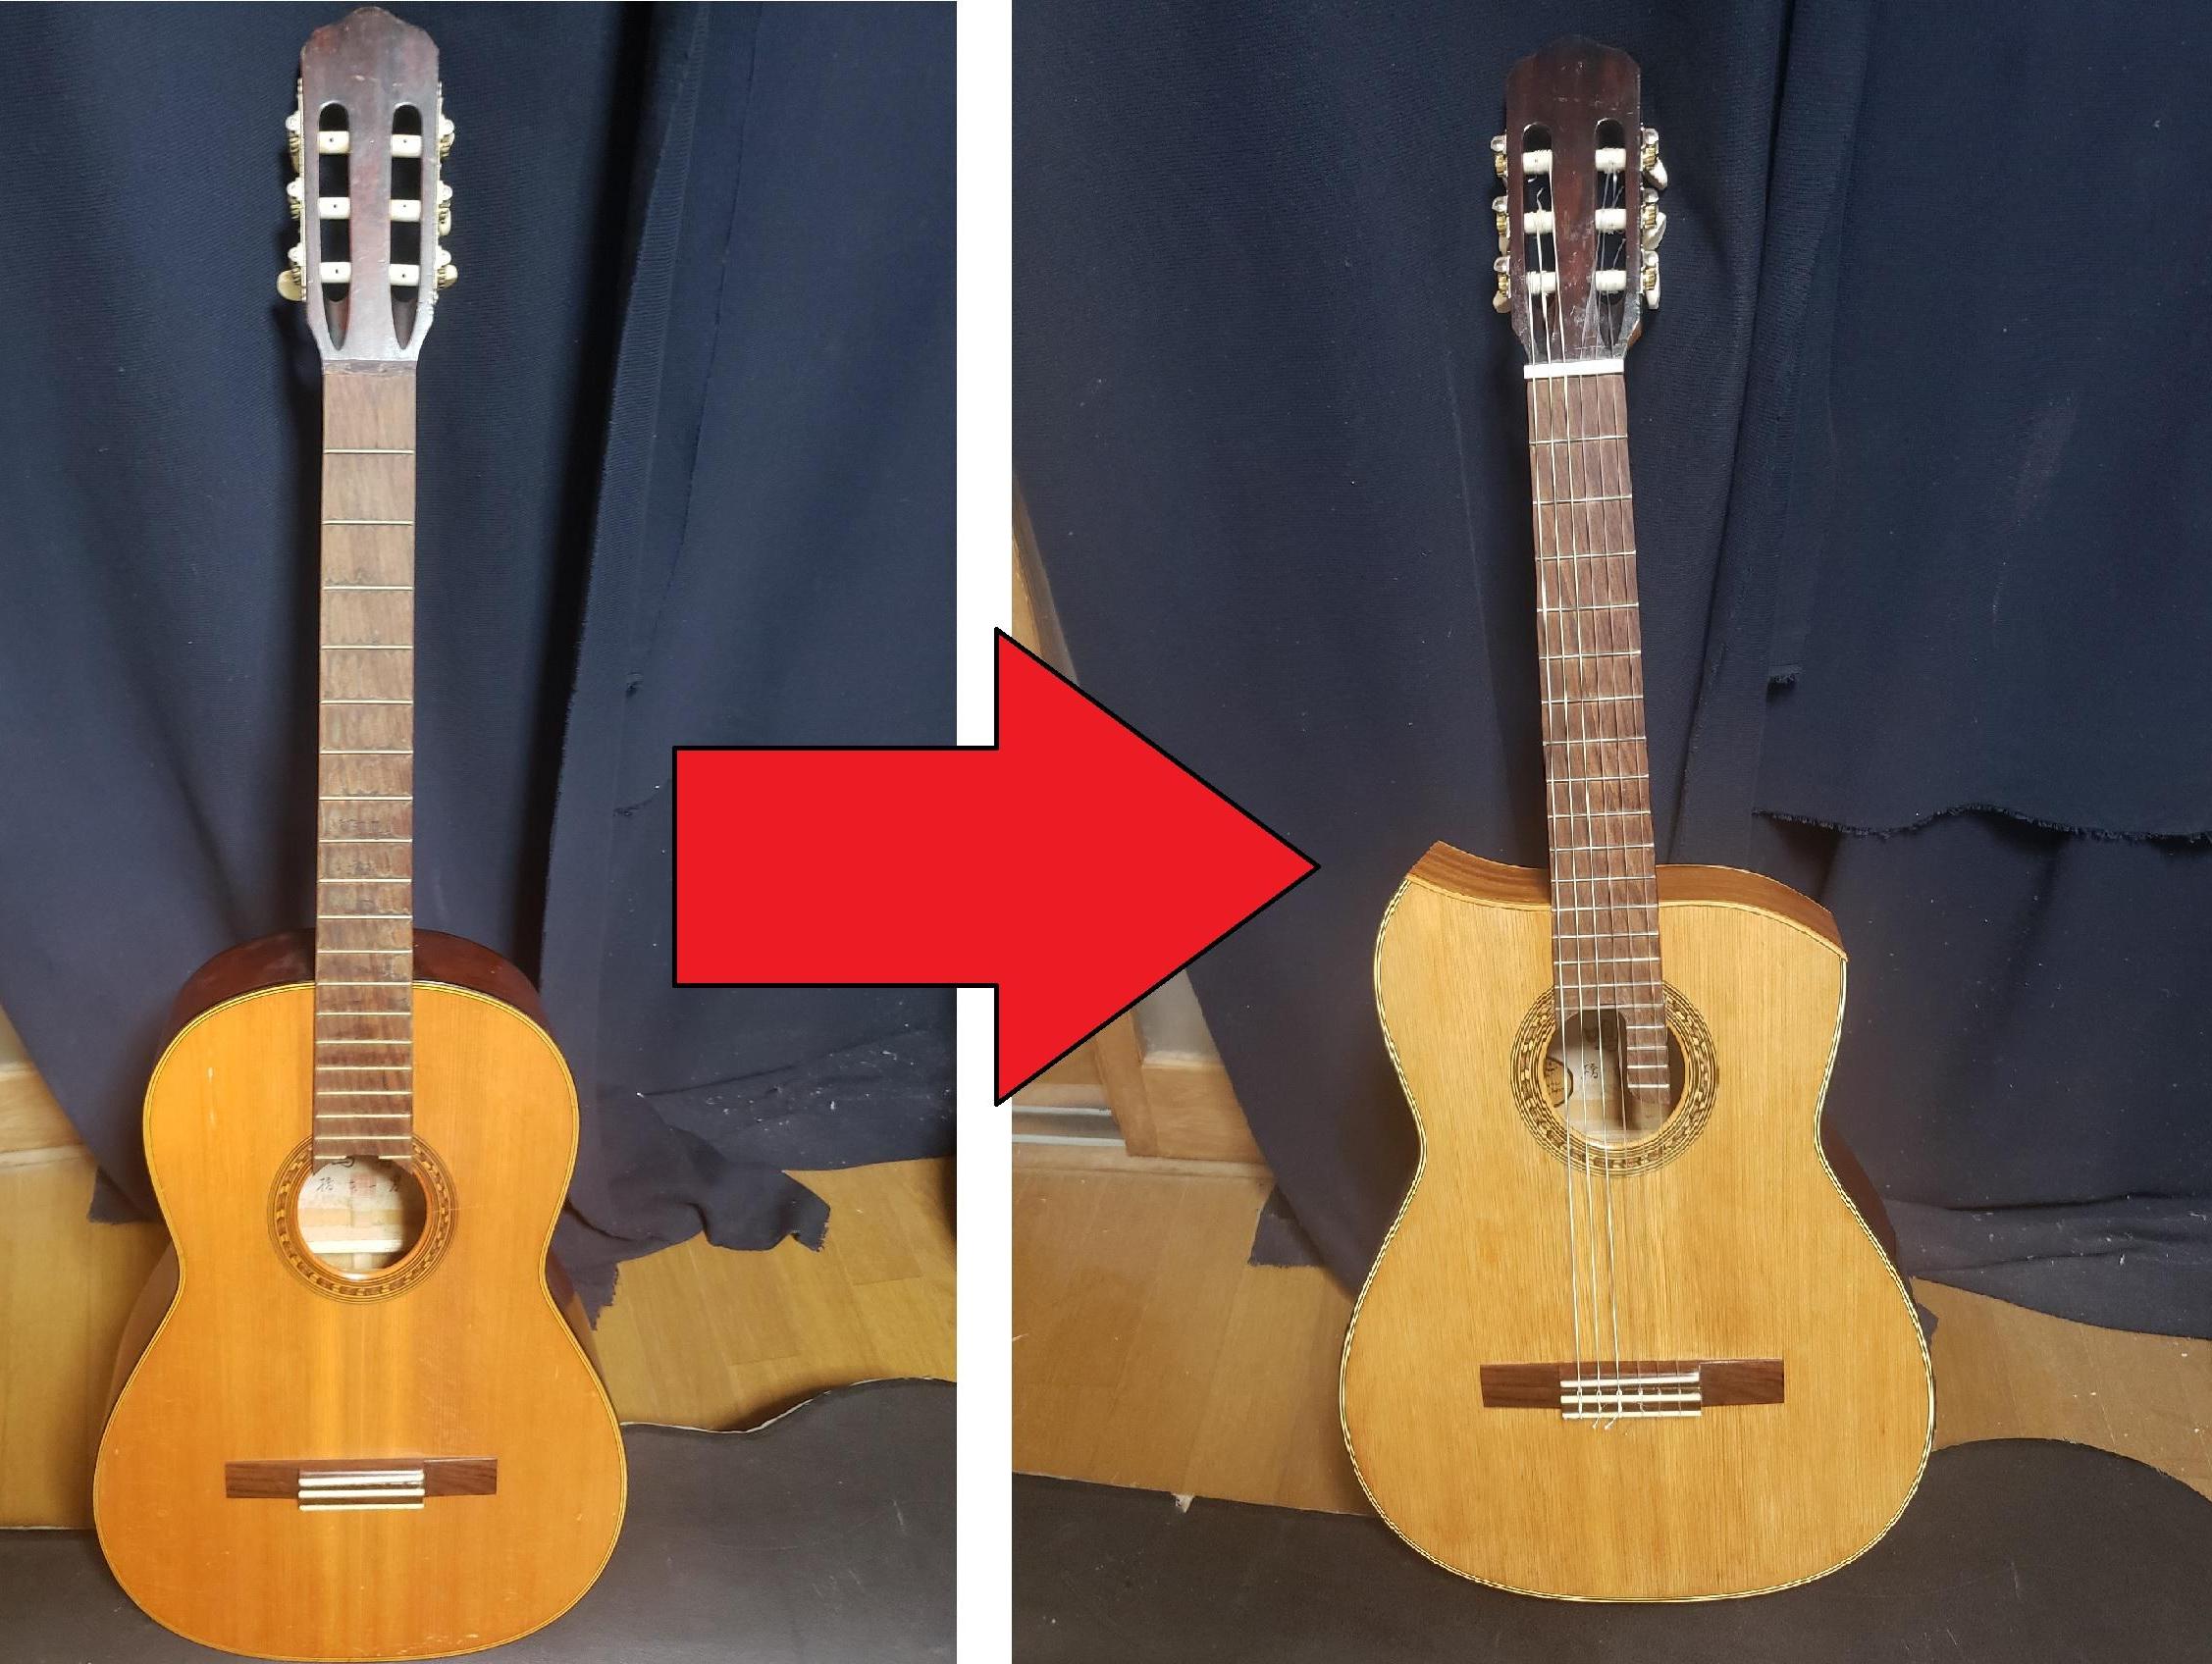 Converting a Classical Guitar Into a "Frankenstein" Terz Guitar (with Video)